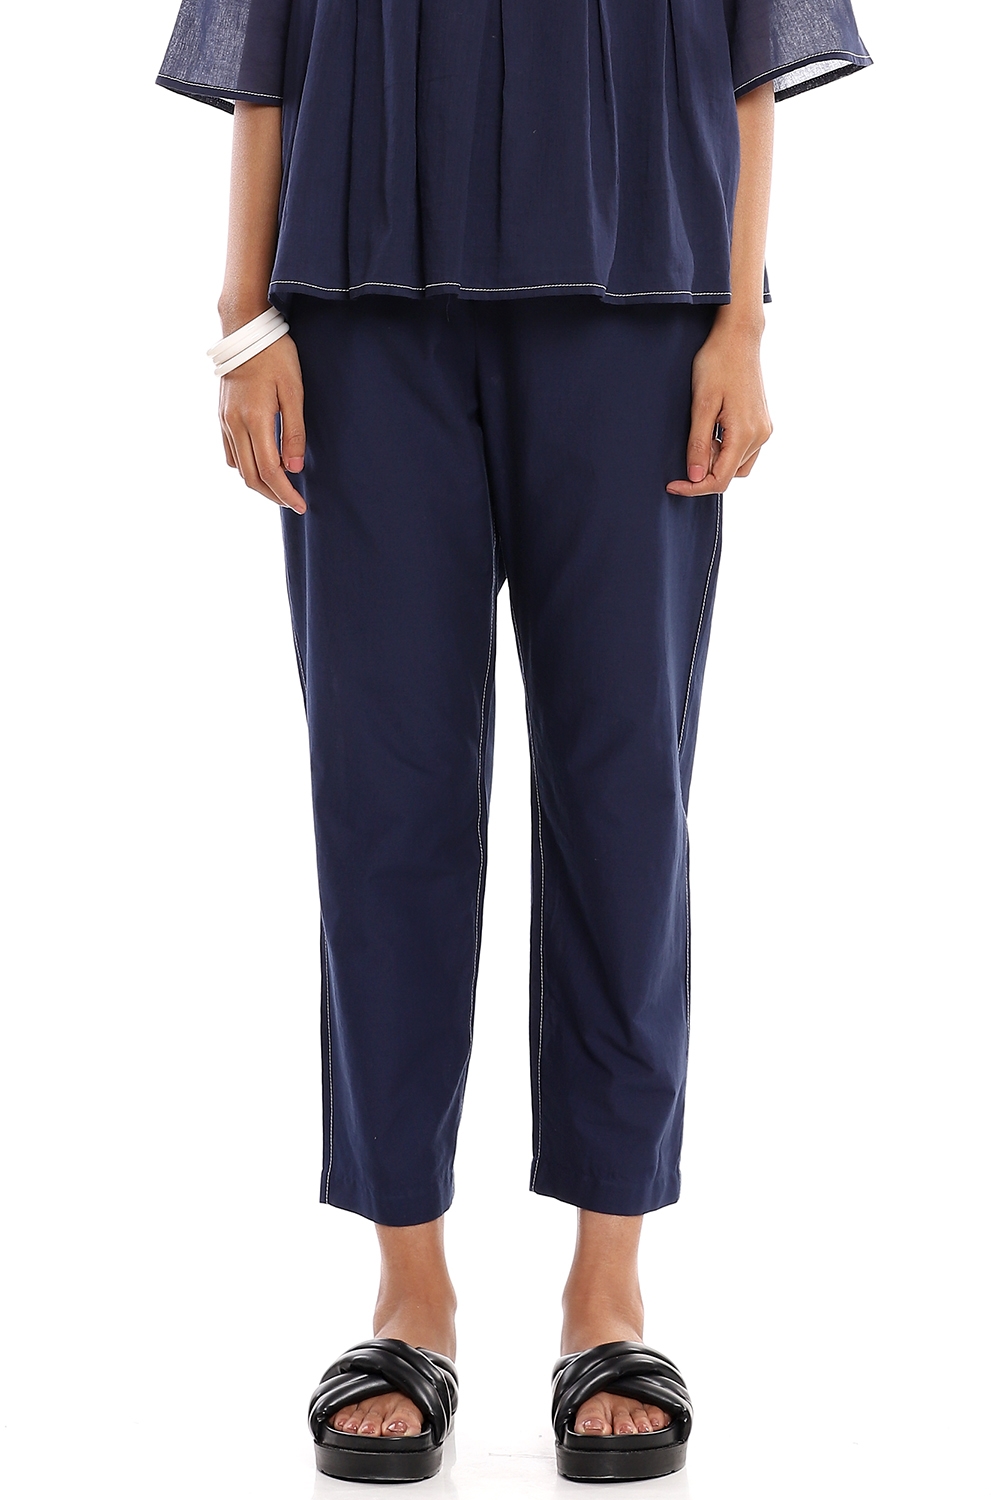 ABRAHAM AND THAKORE | Navy Cotton Cropped Pants